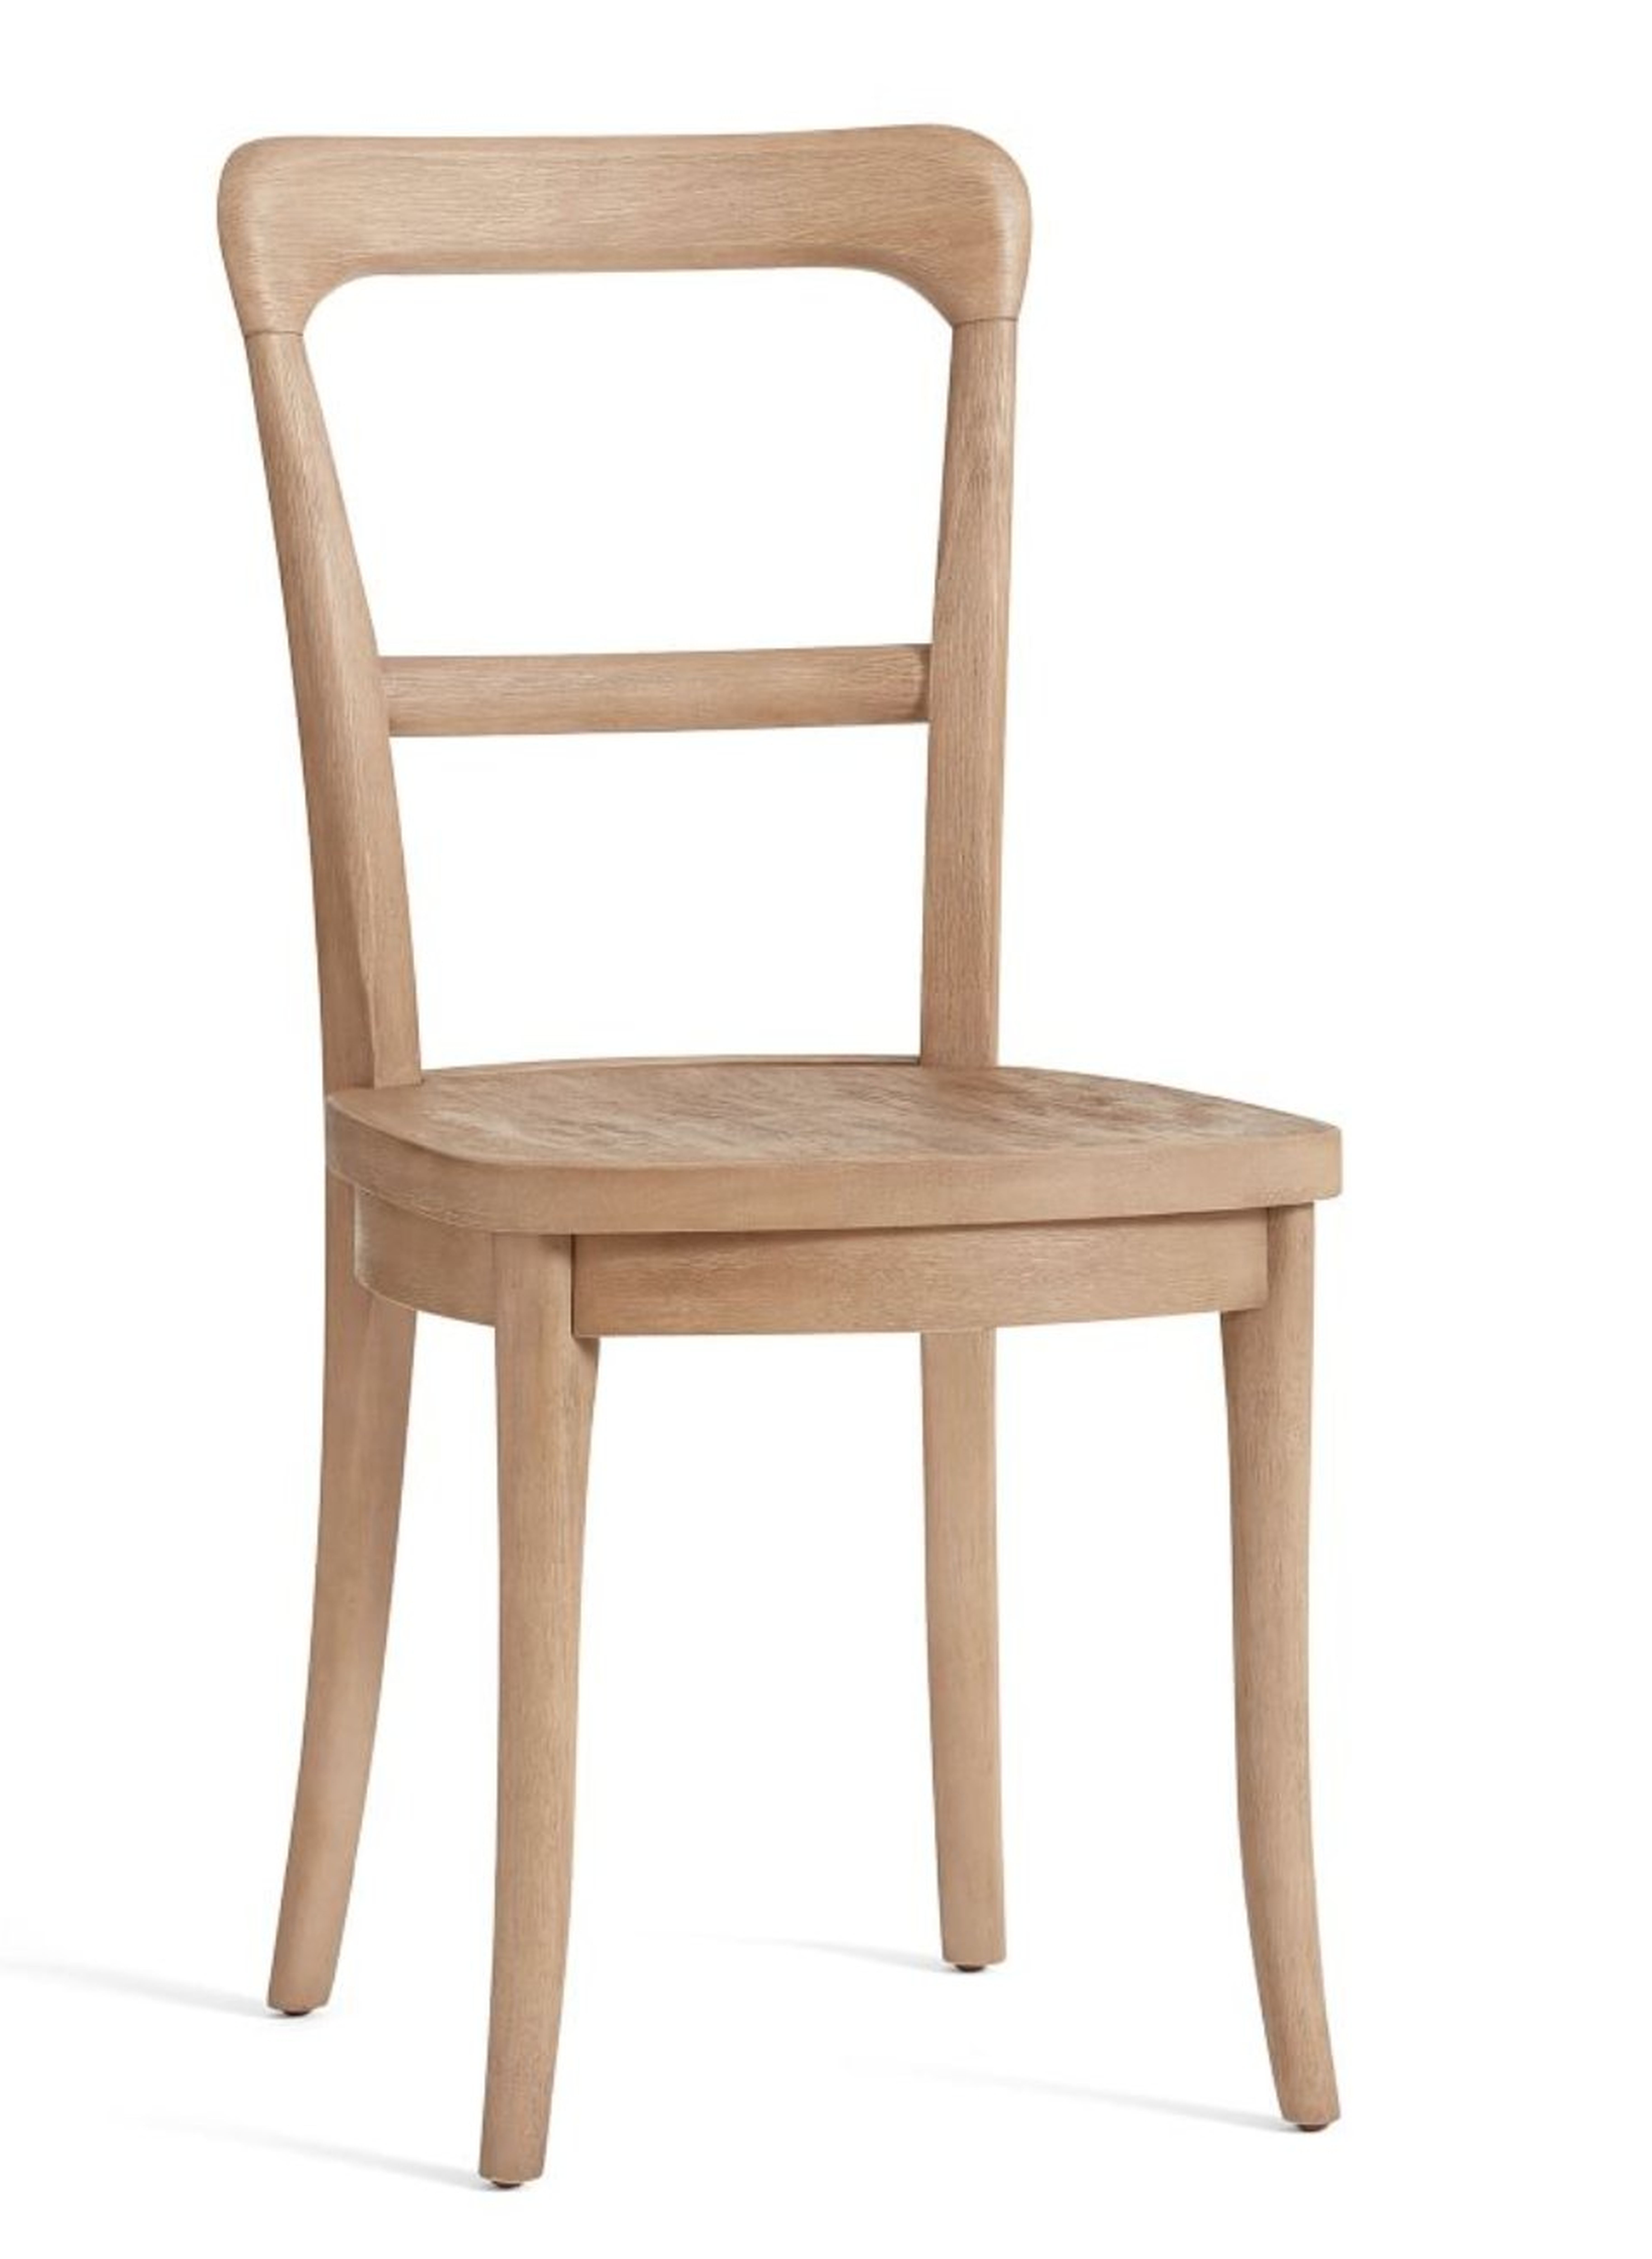 Cline Bistro Dining Chair, Set of 2 - Pottery Barn